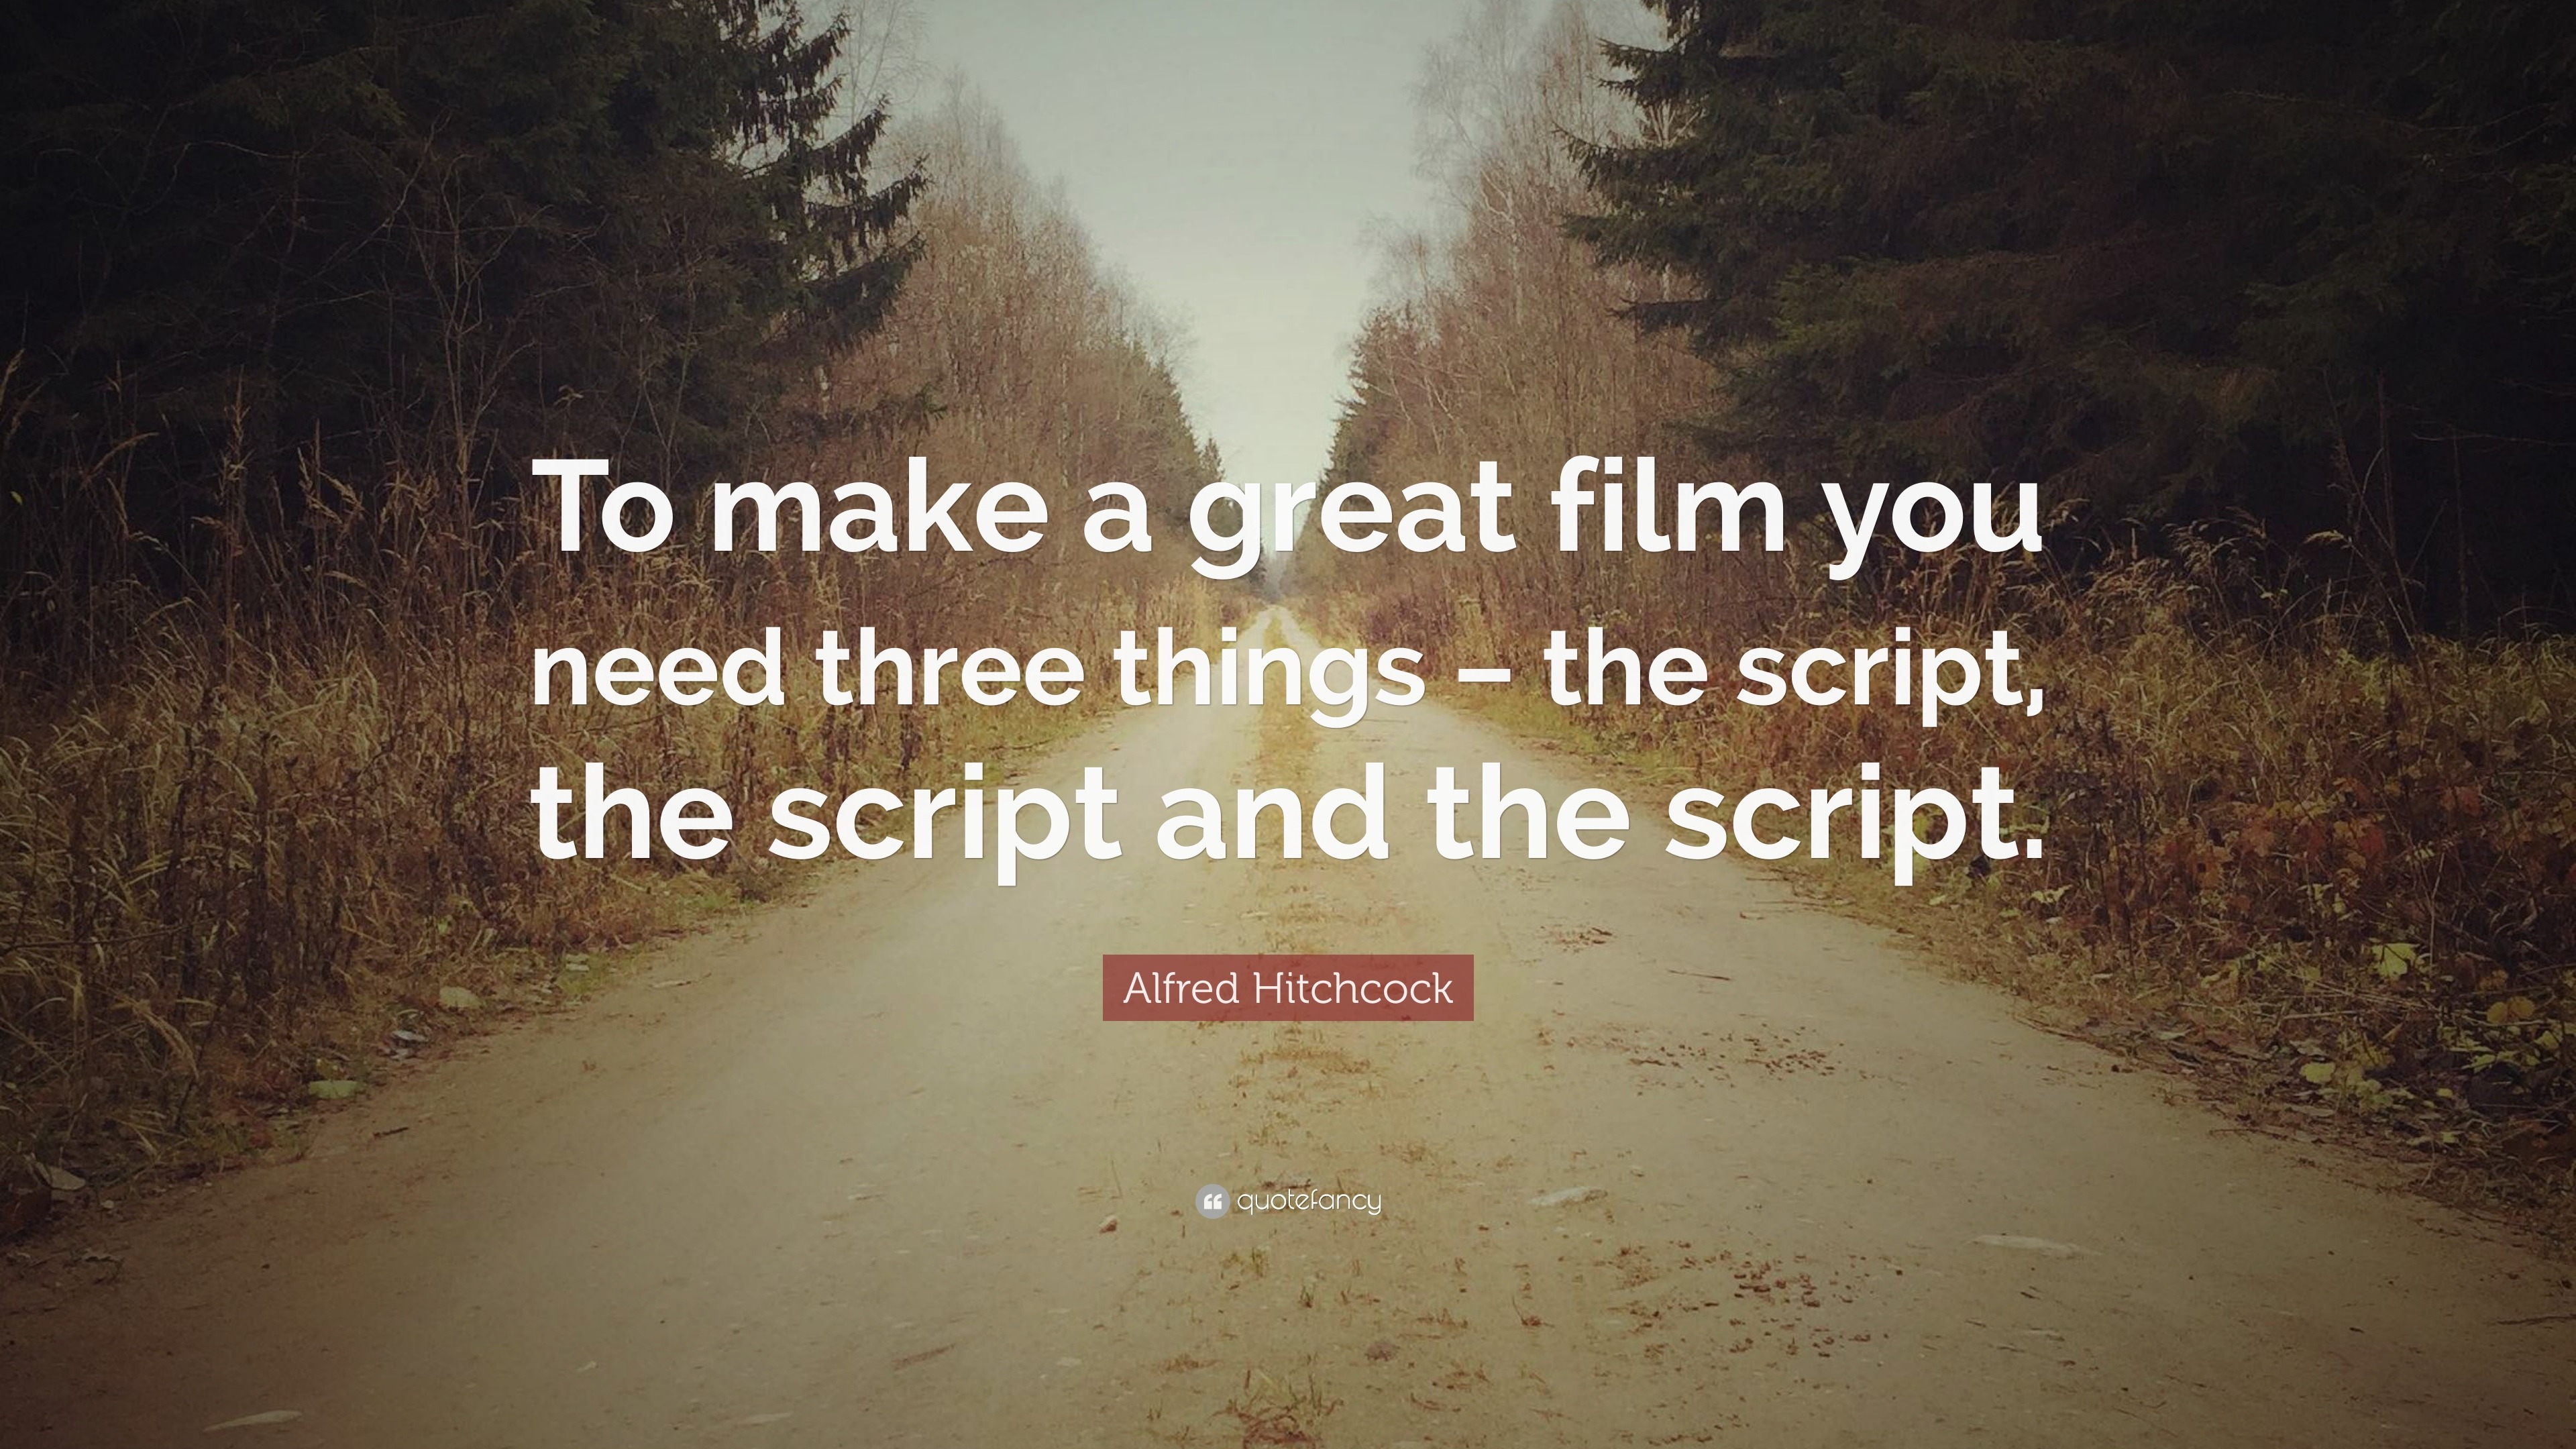 Alfred Hitchcock Quote: "To make a great film you need three things - the script, the script and ...